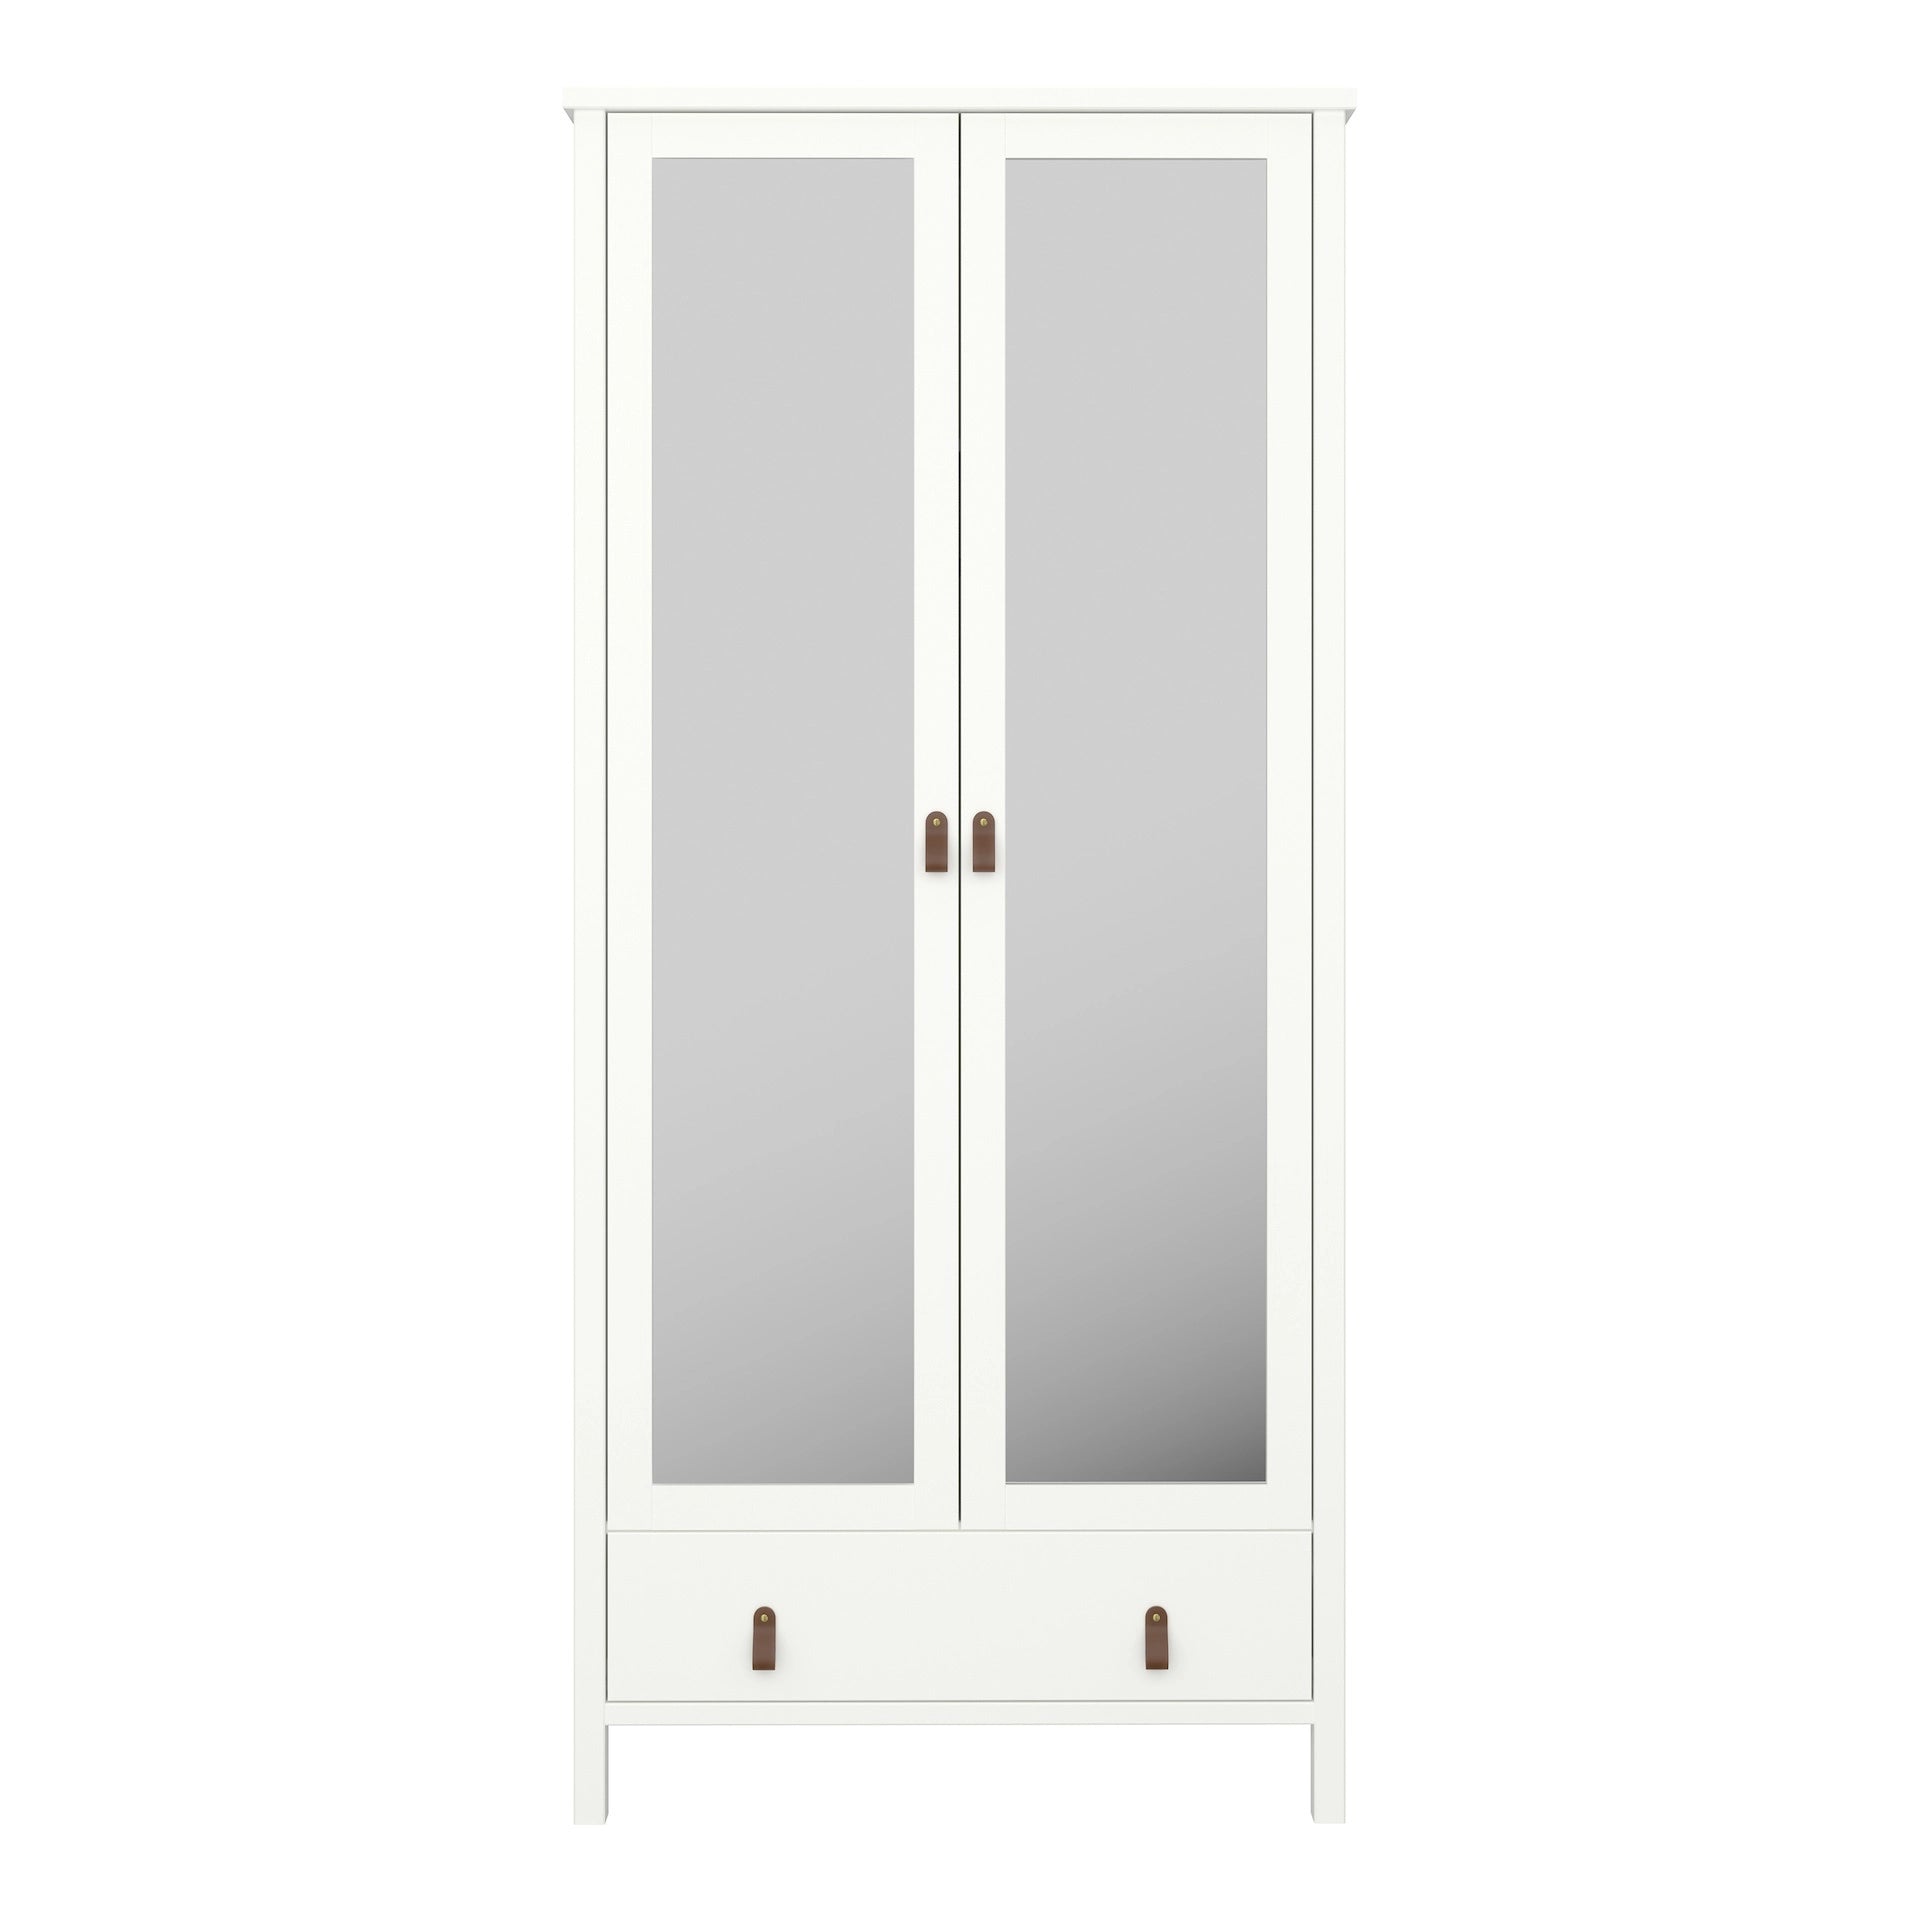 Furniture To Go Tromso 2 Mirror Doors + 1 Drawer Wardrobe White with Leather Handles